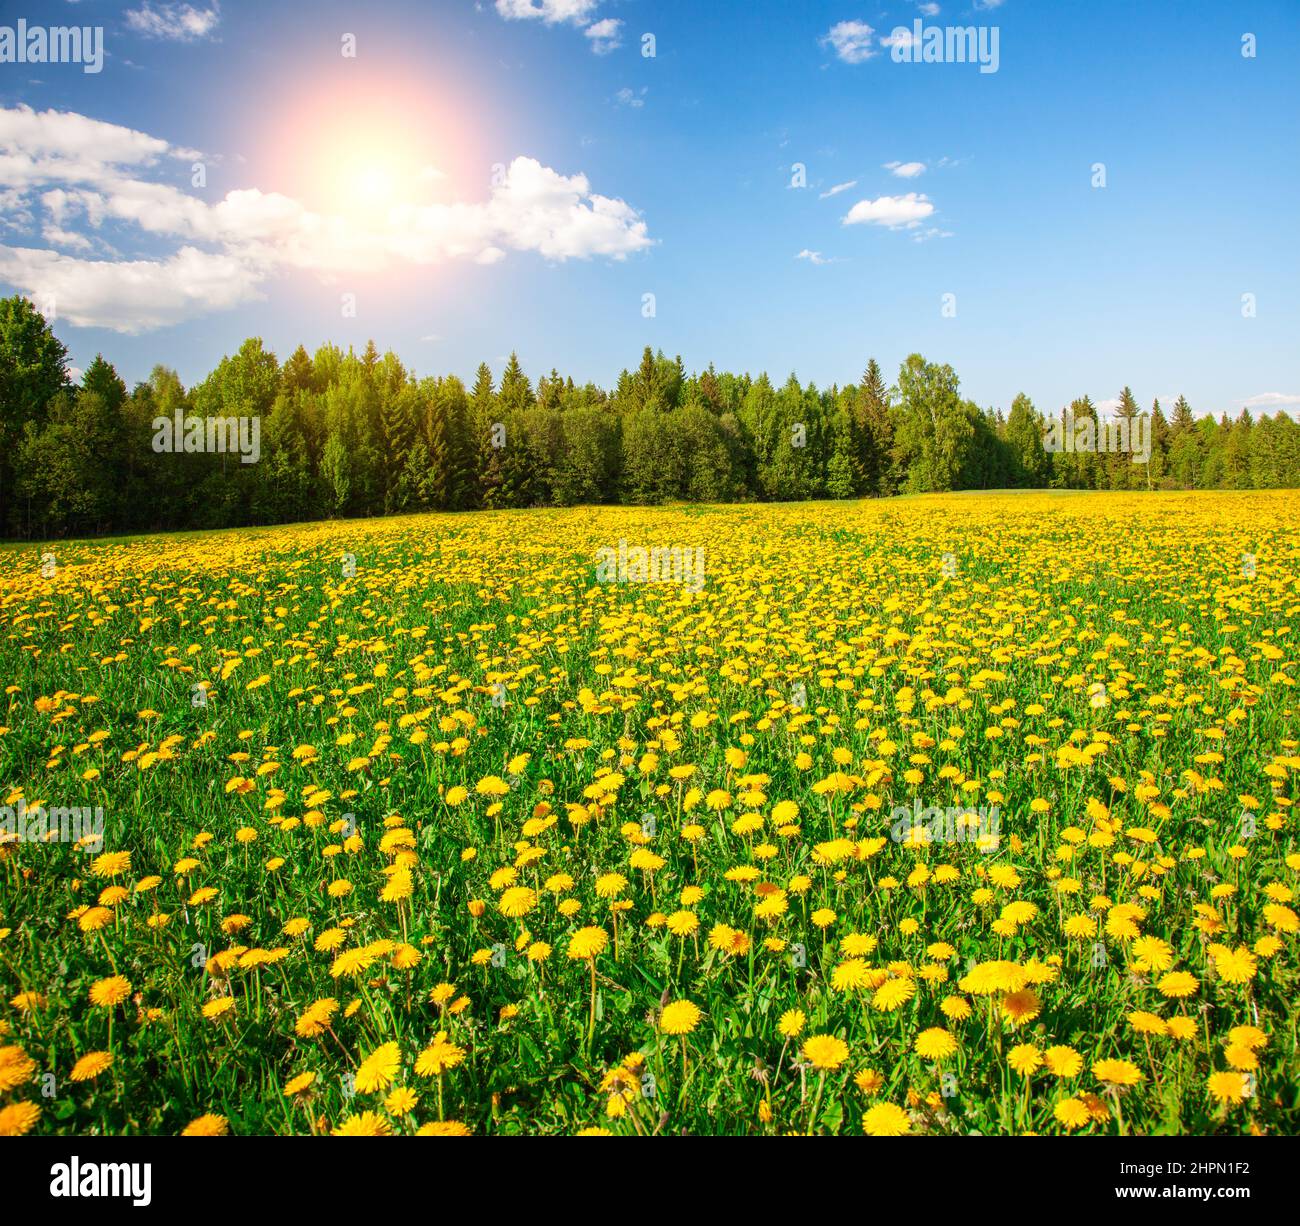 Yellow flowers hill under blue cloudy sky with sun Stock Photo